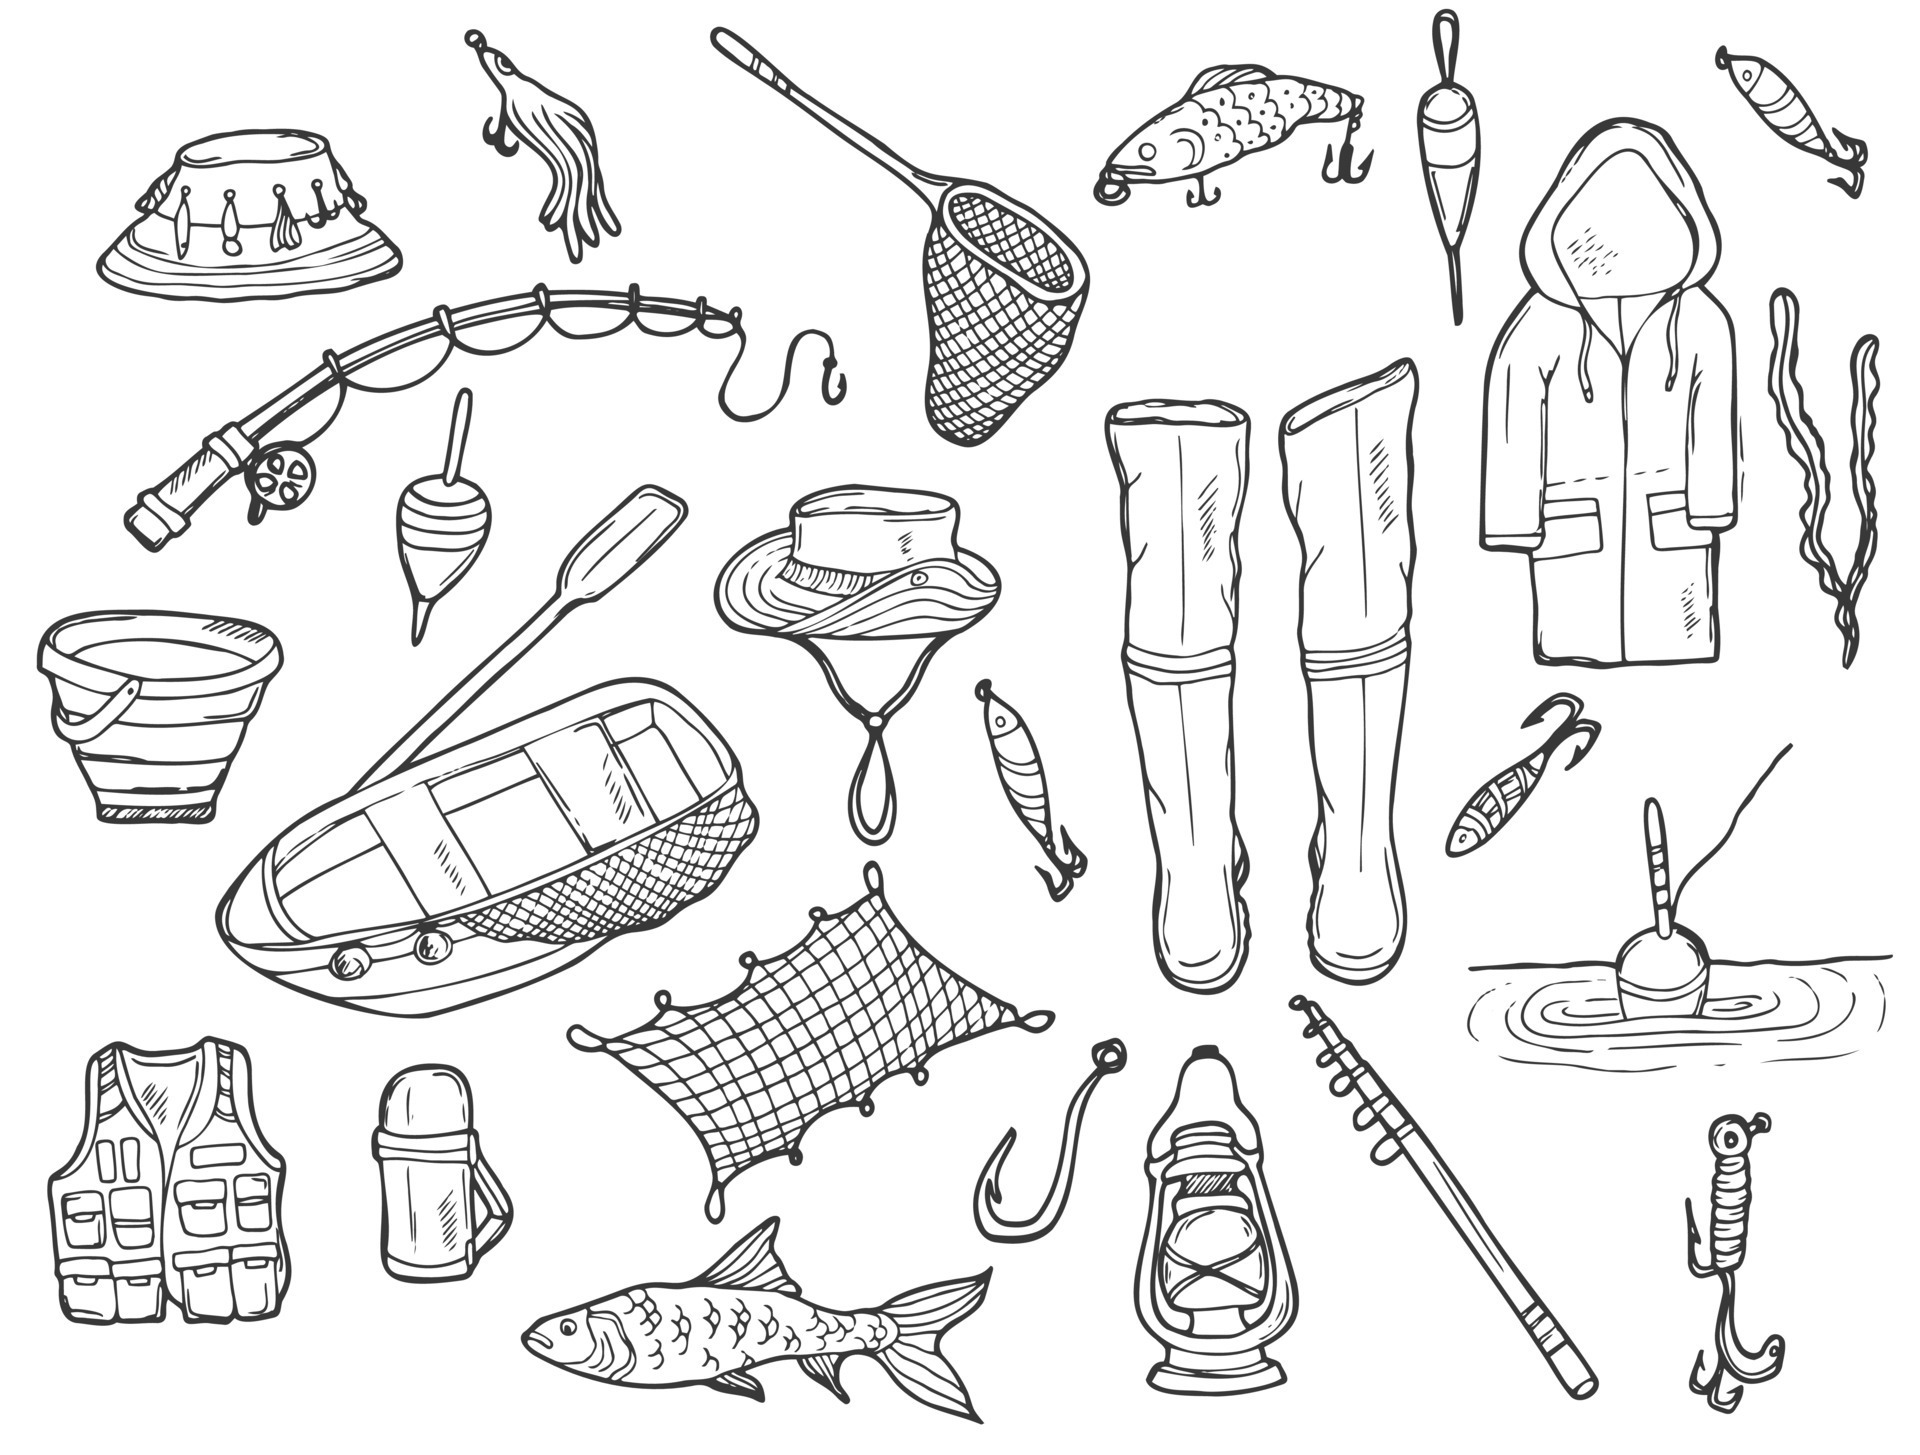 https://static.vecteezy.com/system/resources/previews/018/997/770/original/doodle-fishing-set-fishing-and-camping-stuff-in-hand-drawn-illustration-vector.jpg